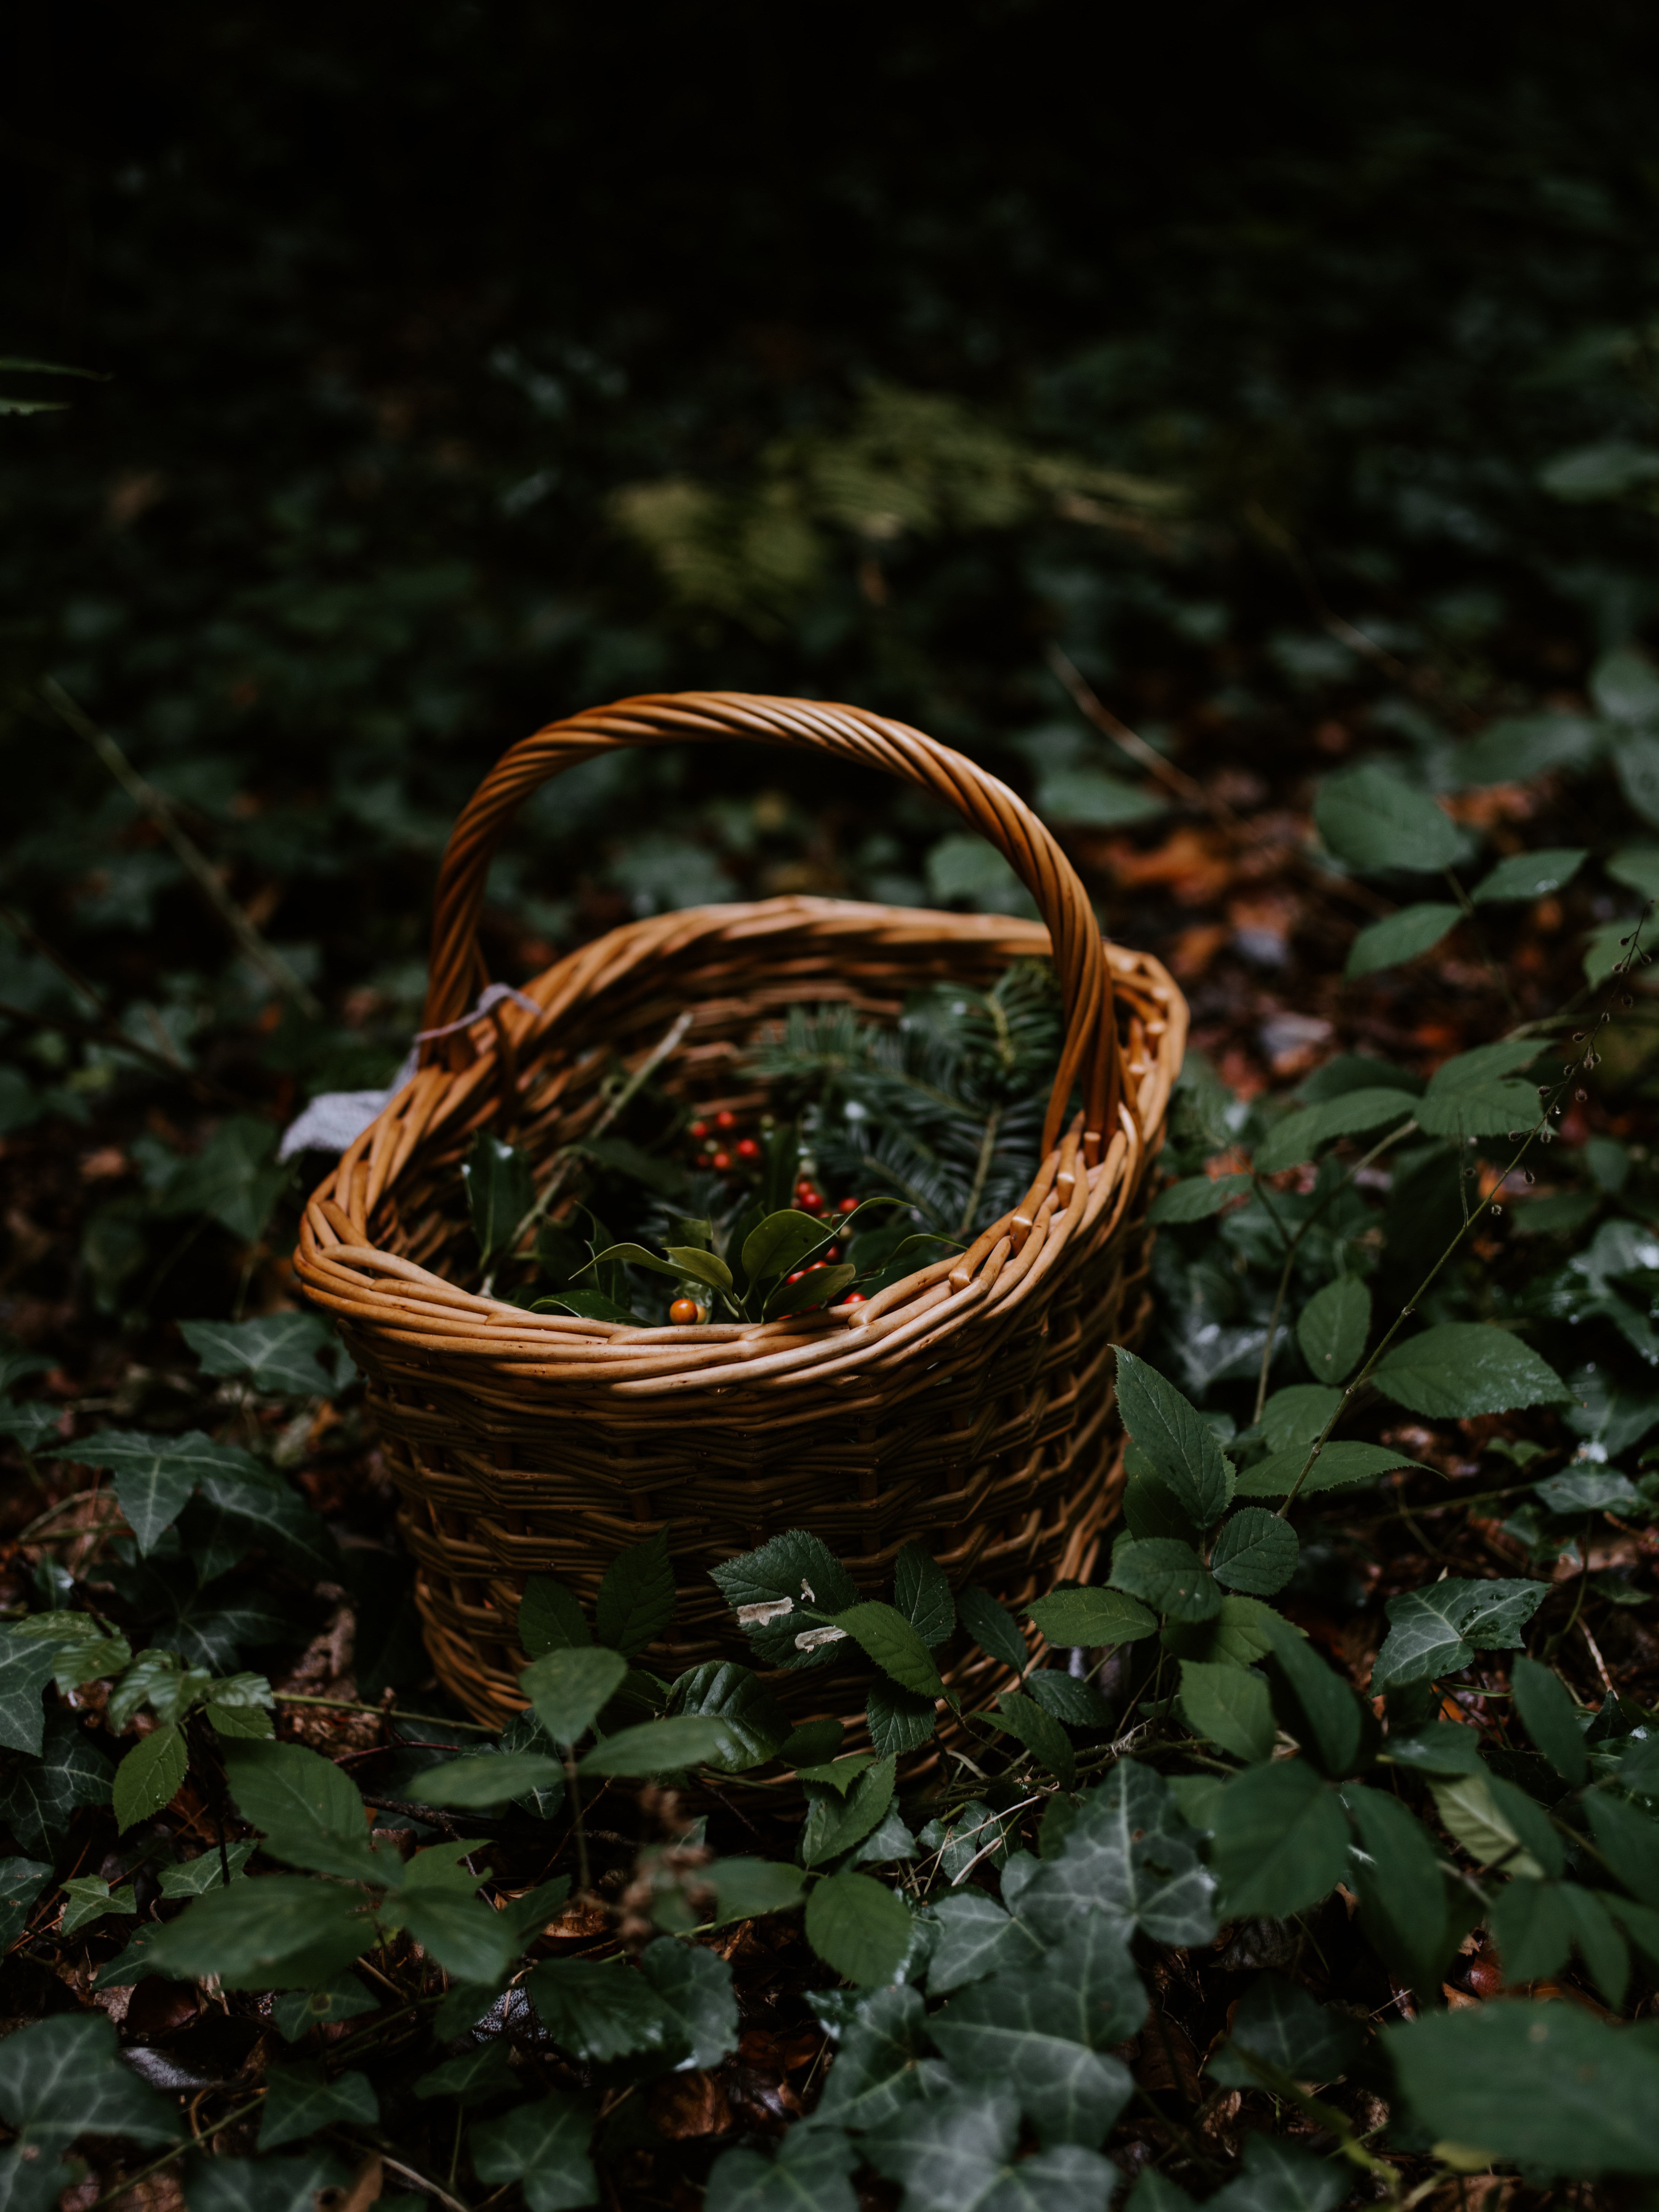 Free HD miscellaneous, nature, berries, miscellanea, branches, basket, wicker, braided